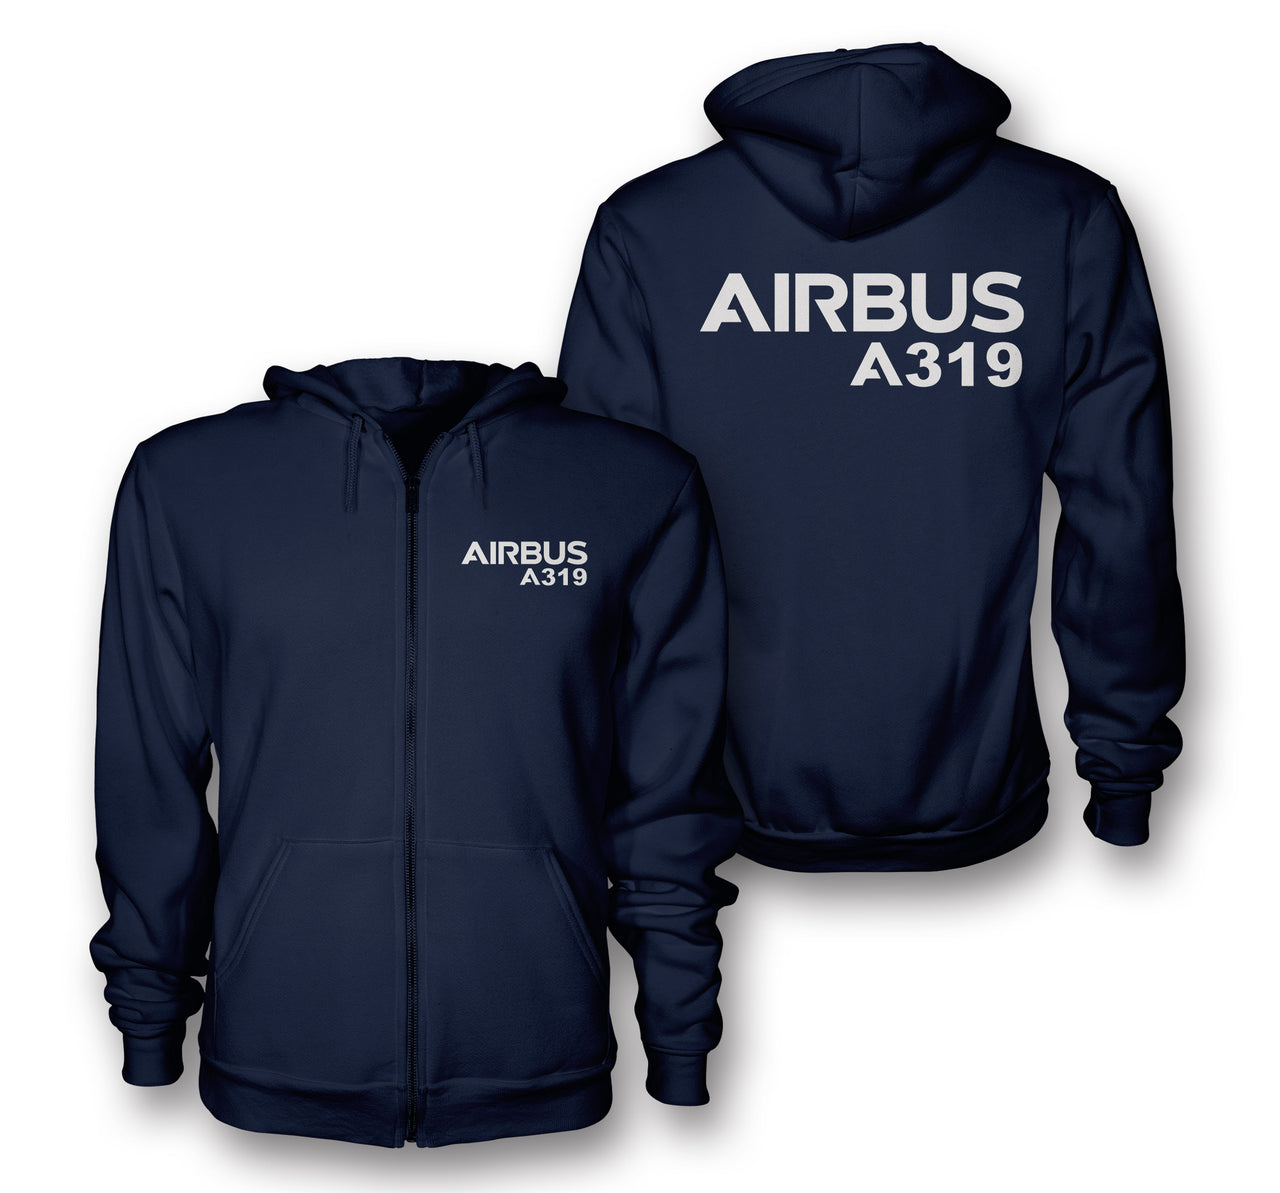 Airbus A319 & Text Designed Zipped Hoodies